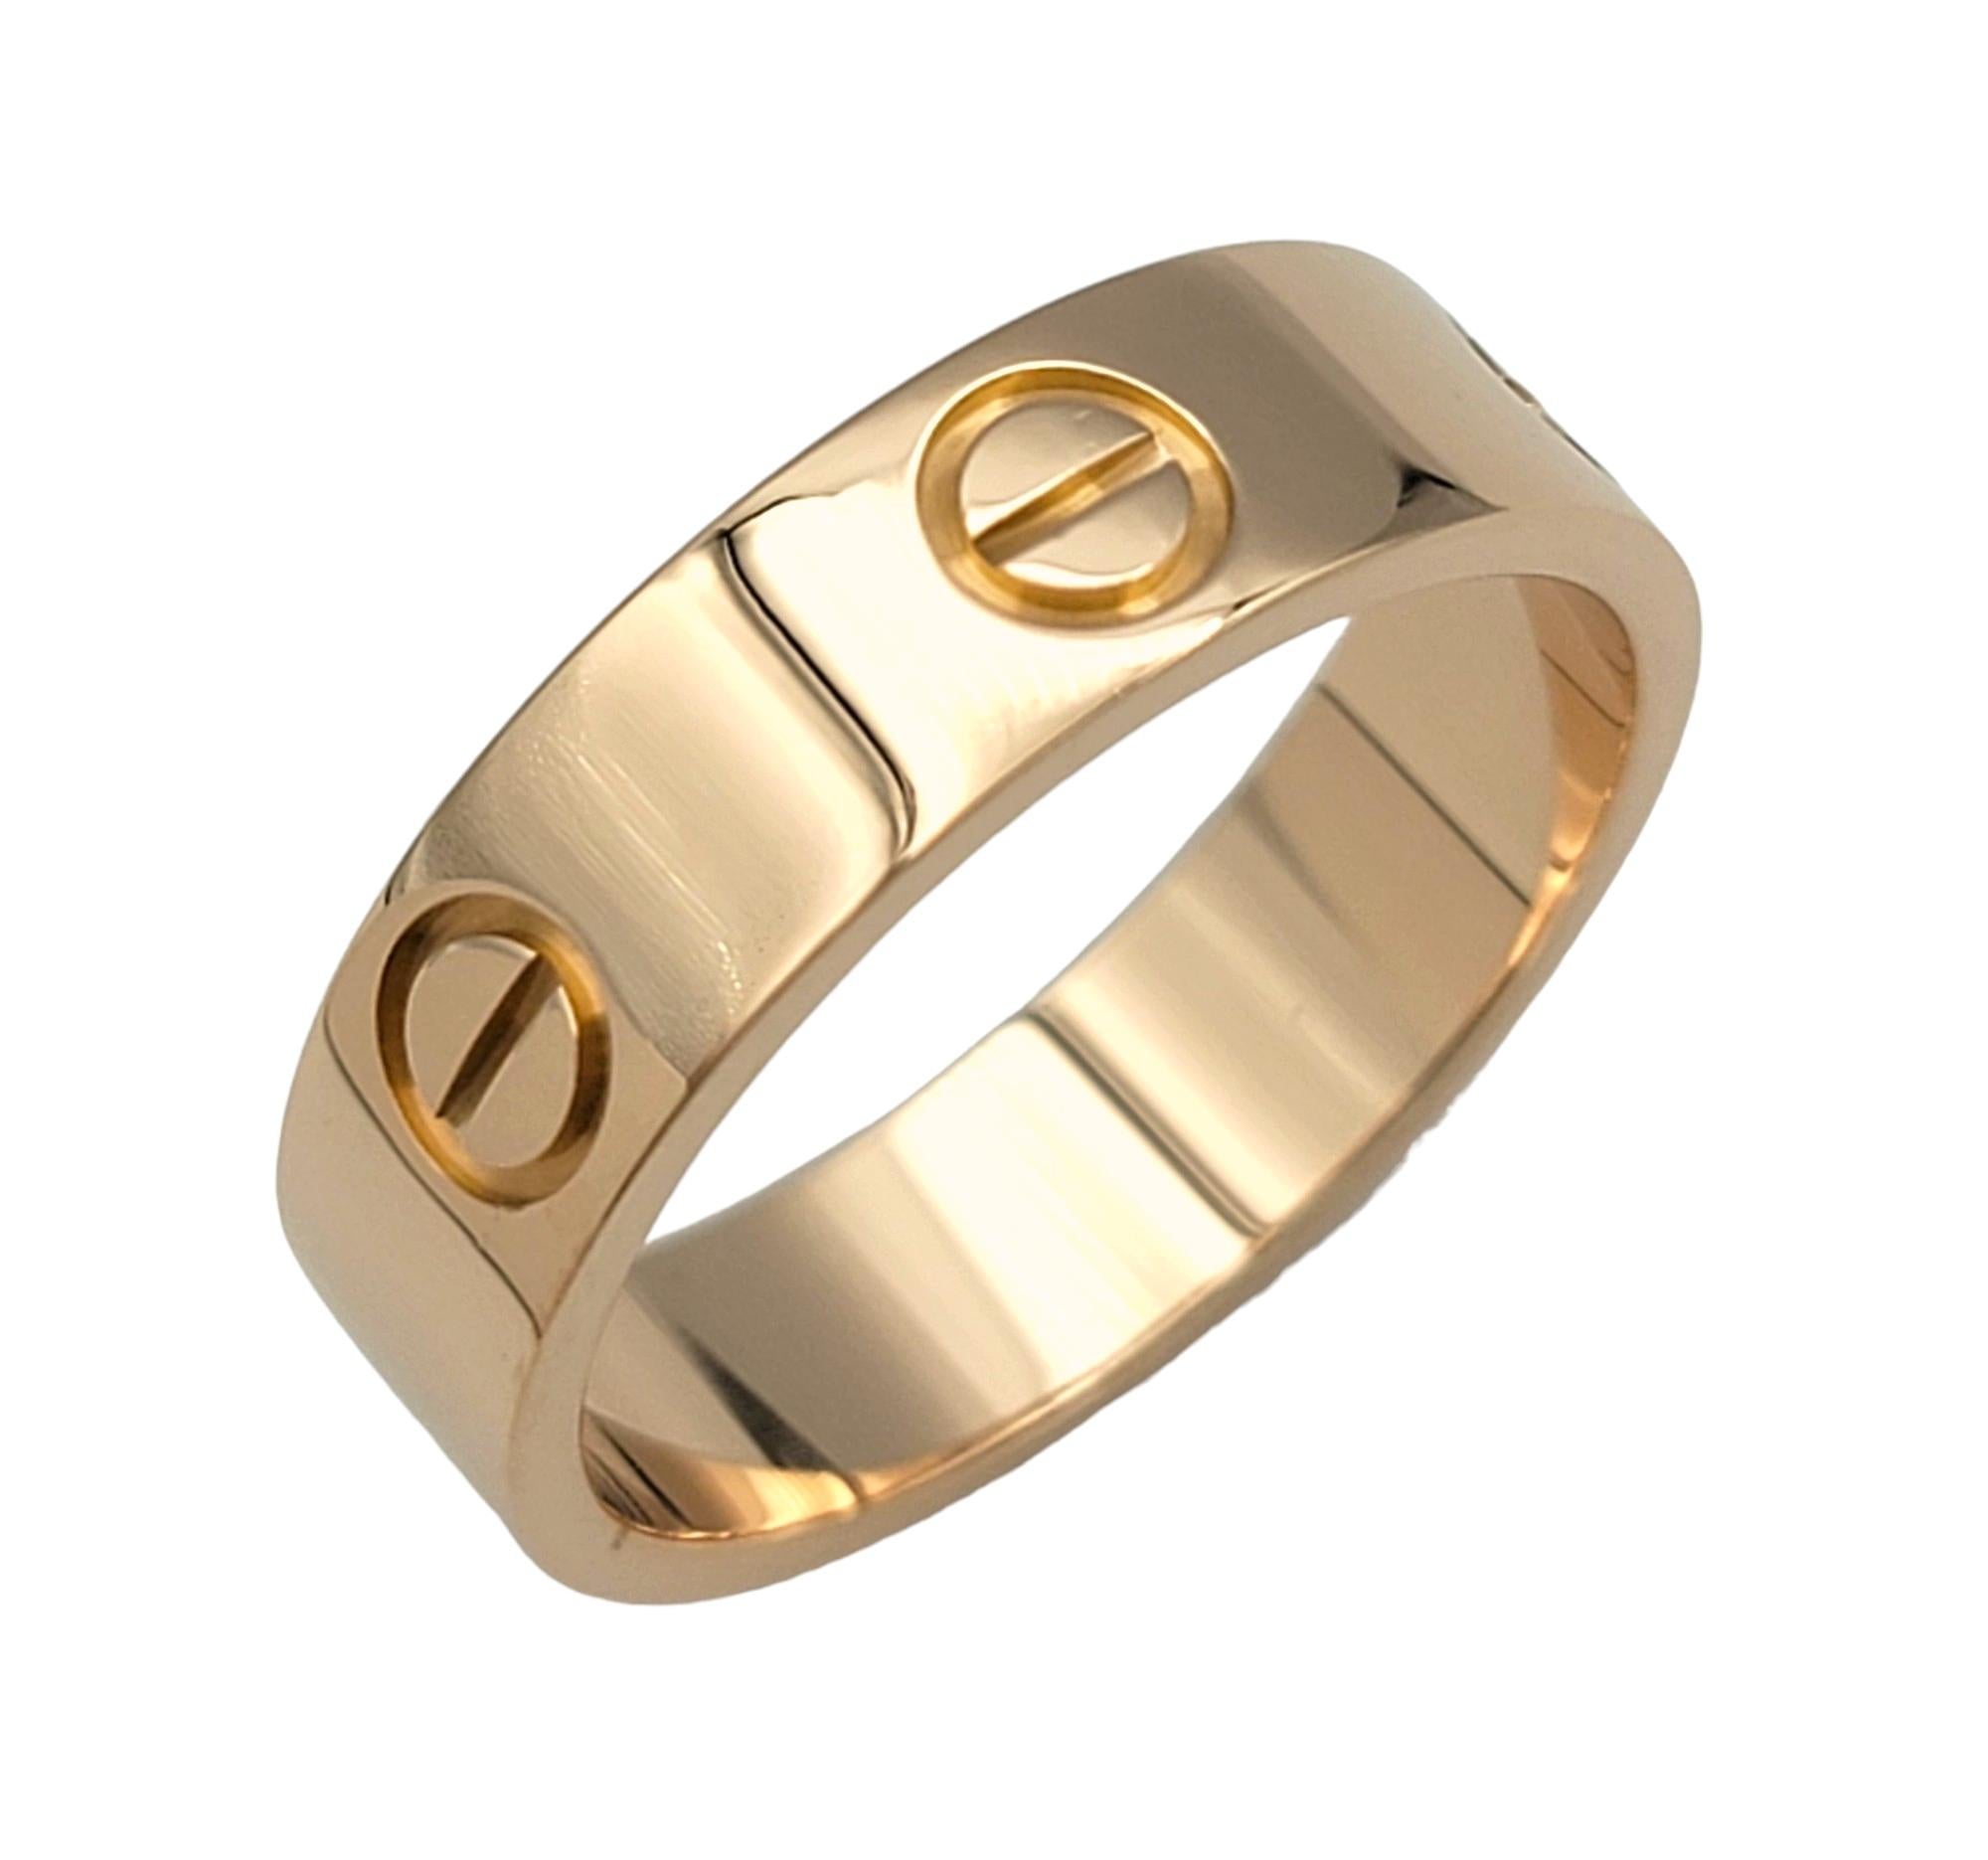 Ring Size: 56 (EU) and 7.75 (US)

This gorgeous Cartier Love ring in 18 karat rose gold is an iconic and timeless piece that epitomizes both elegance and romance. Crafted by the renowned luxury brand Cartier, this ring is a part of the Love